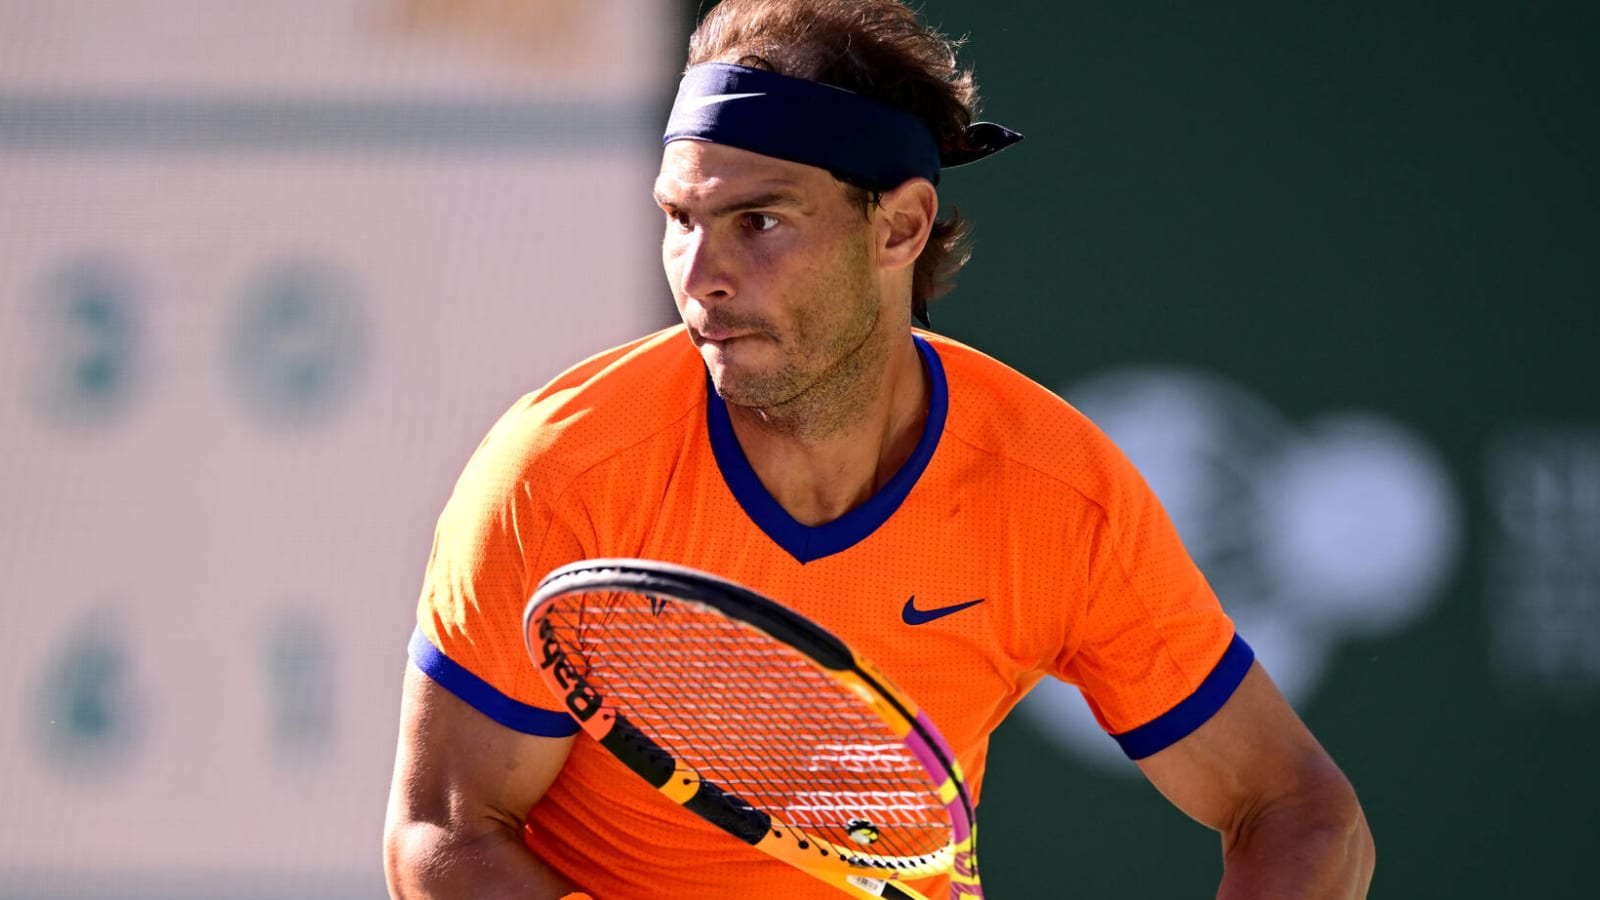 Rafael Nadal to play Madrid Open after recovering from rib injury